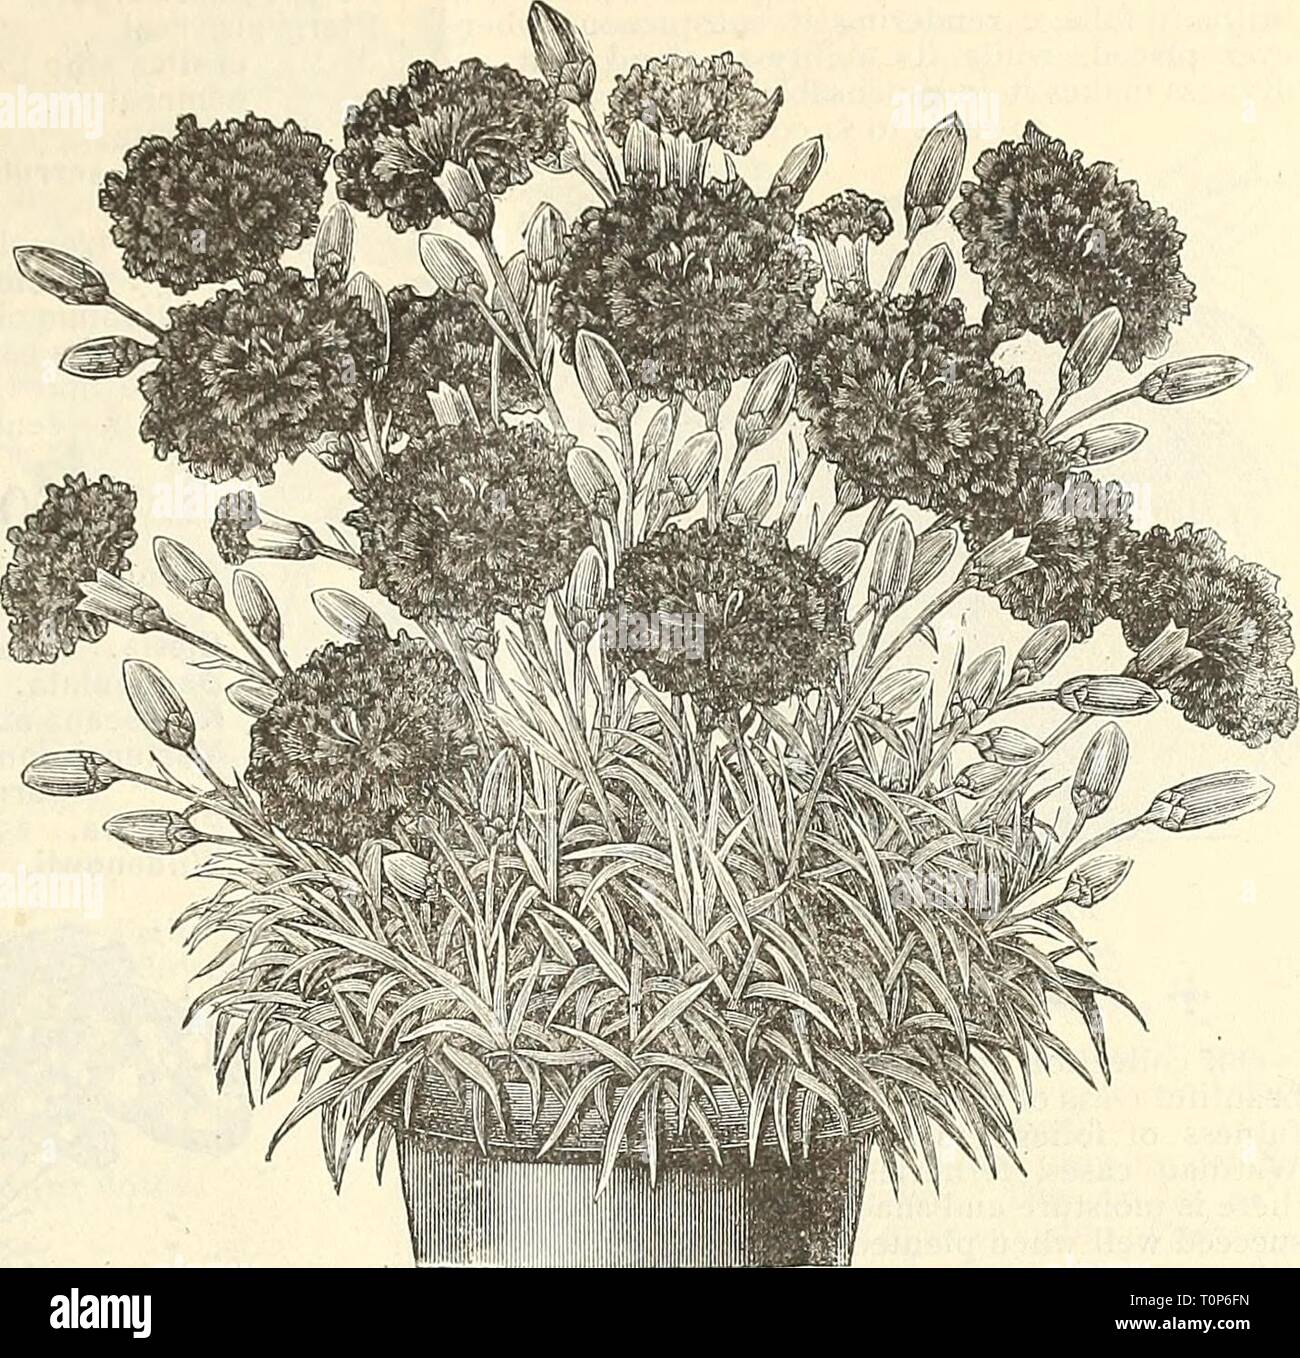 Dreer's bulb list  1887 Dreer's bulb list : 1887  dreersbulblist181887henr Year: 1887  Dreefts HUTUMN l^LANT LilST. 23 CARNATIONS Buttercup. Rich golden yel- low, streaked with car- mine ; of vigorous habit and very flcriferous. The florets are large, full and very double. Dawn. This is a new de- parture in Carnations, be- ing neither what is called a straight or solid color, or variegated, but a blend- ing from the centre of the flower outwards, of a soft delicate pink or rose color to pure white at the edge, delightful fragrance. Crimson King. Dark crim- son scarlet; very large. Duke of Oran Stock Photo